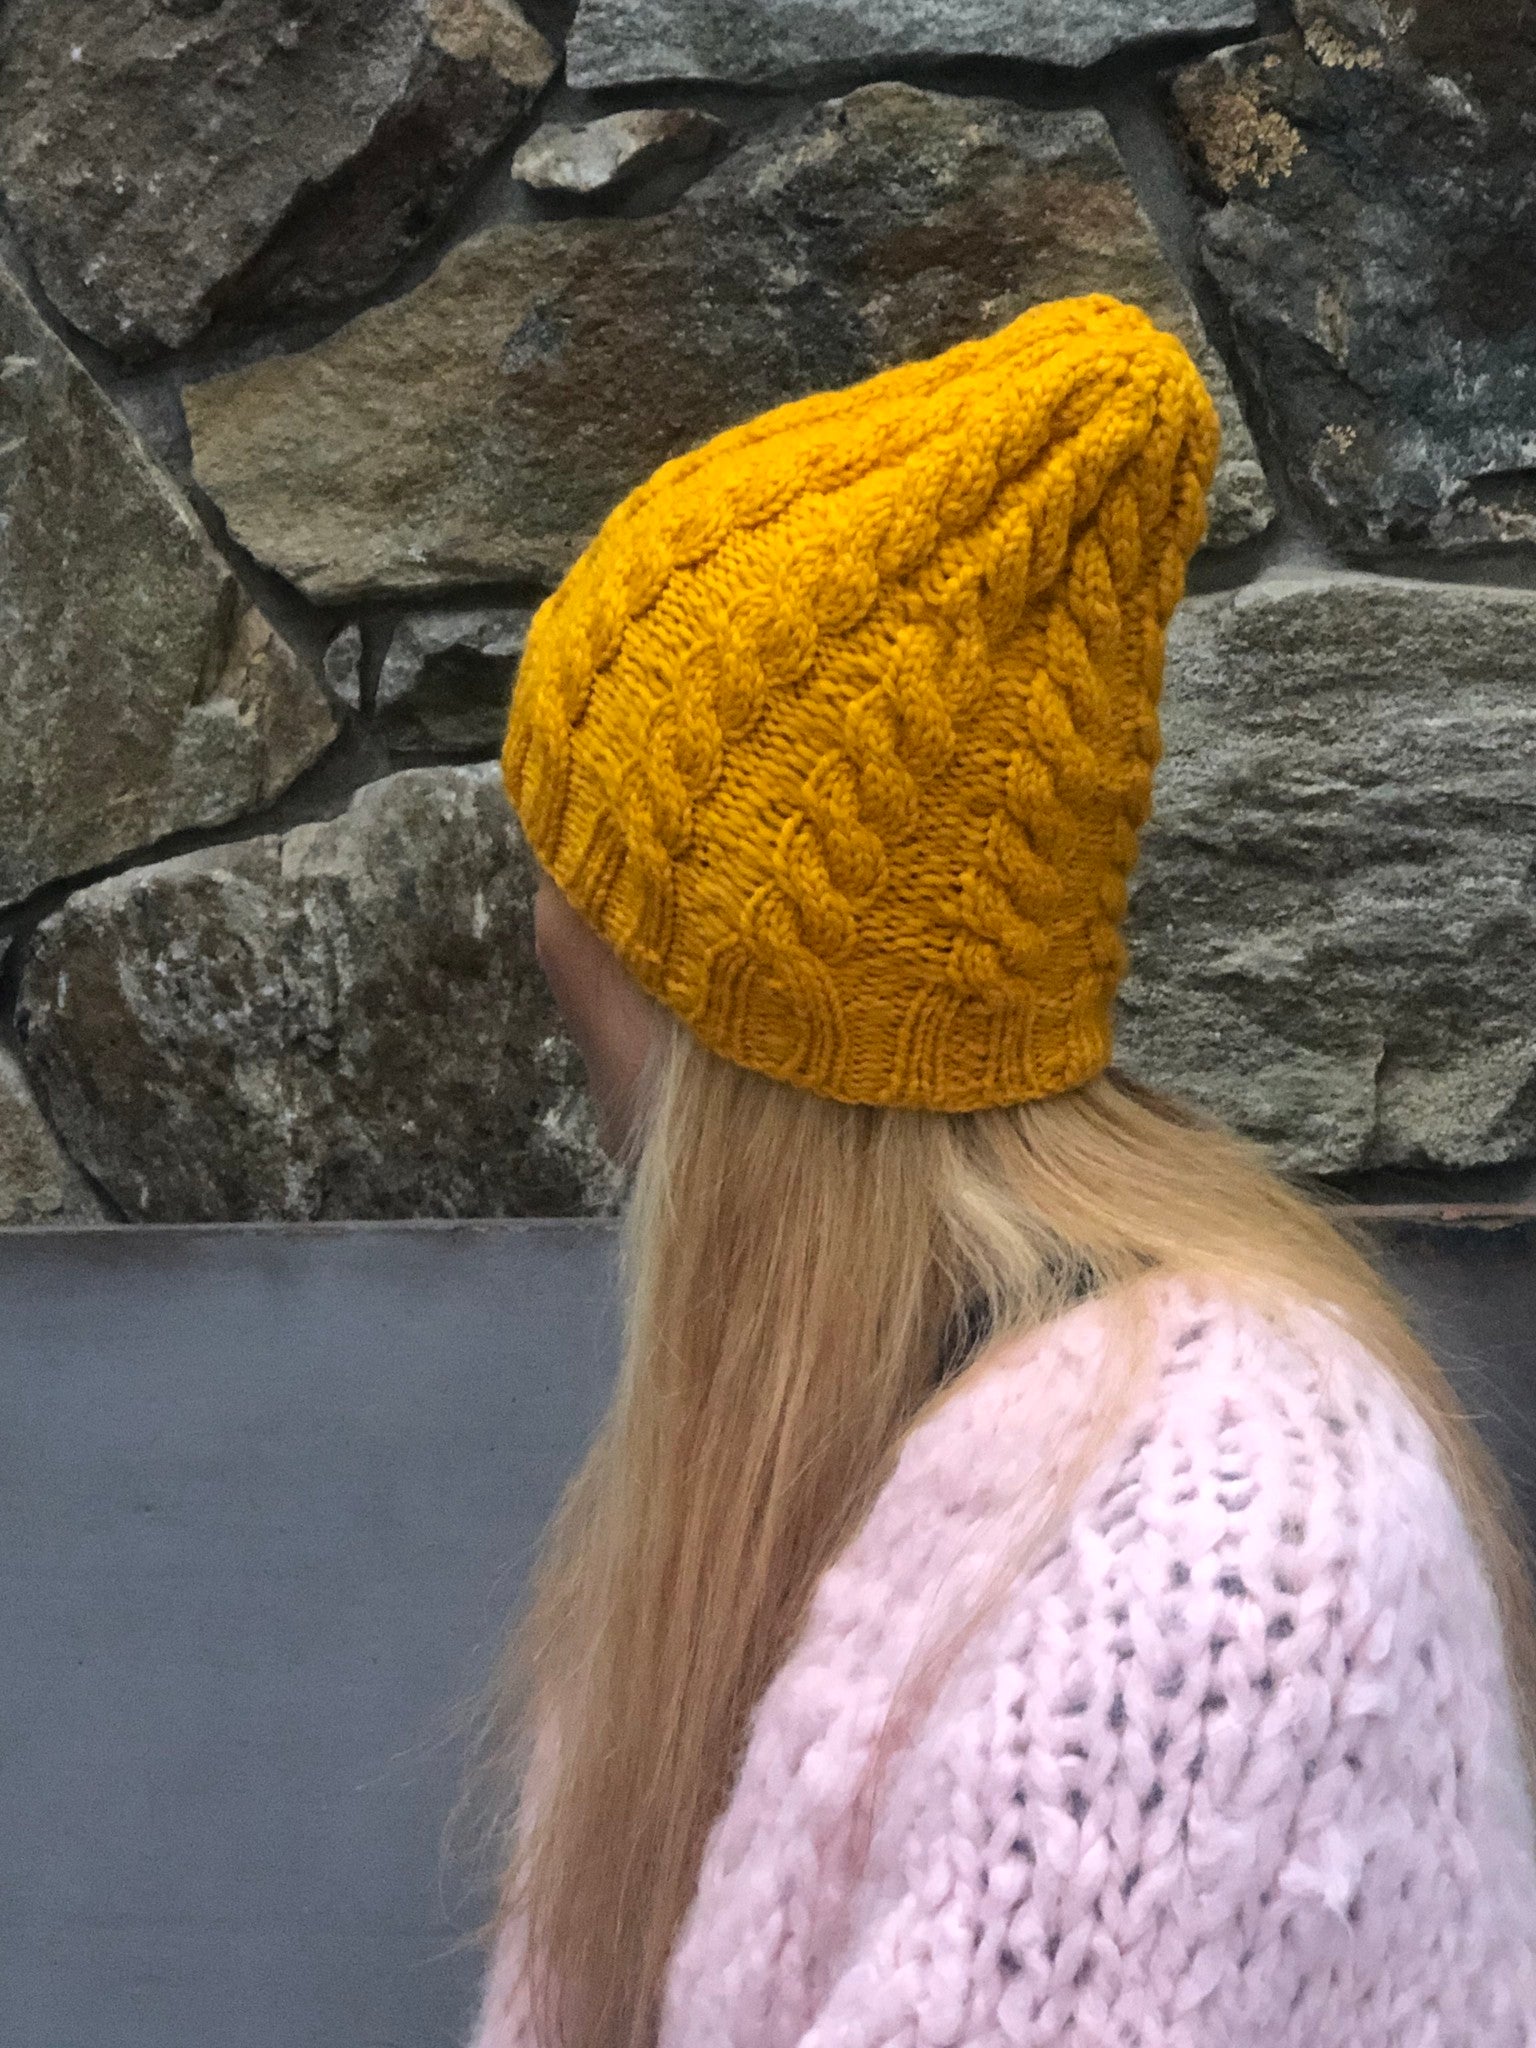 Classic Cable Beanie- PATTERN - Dream (Merino Worsted)